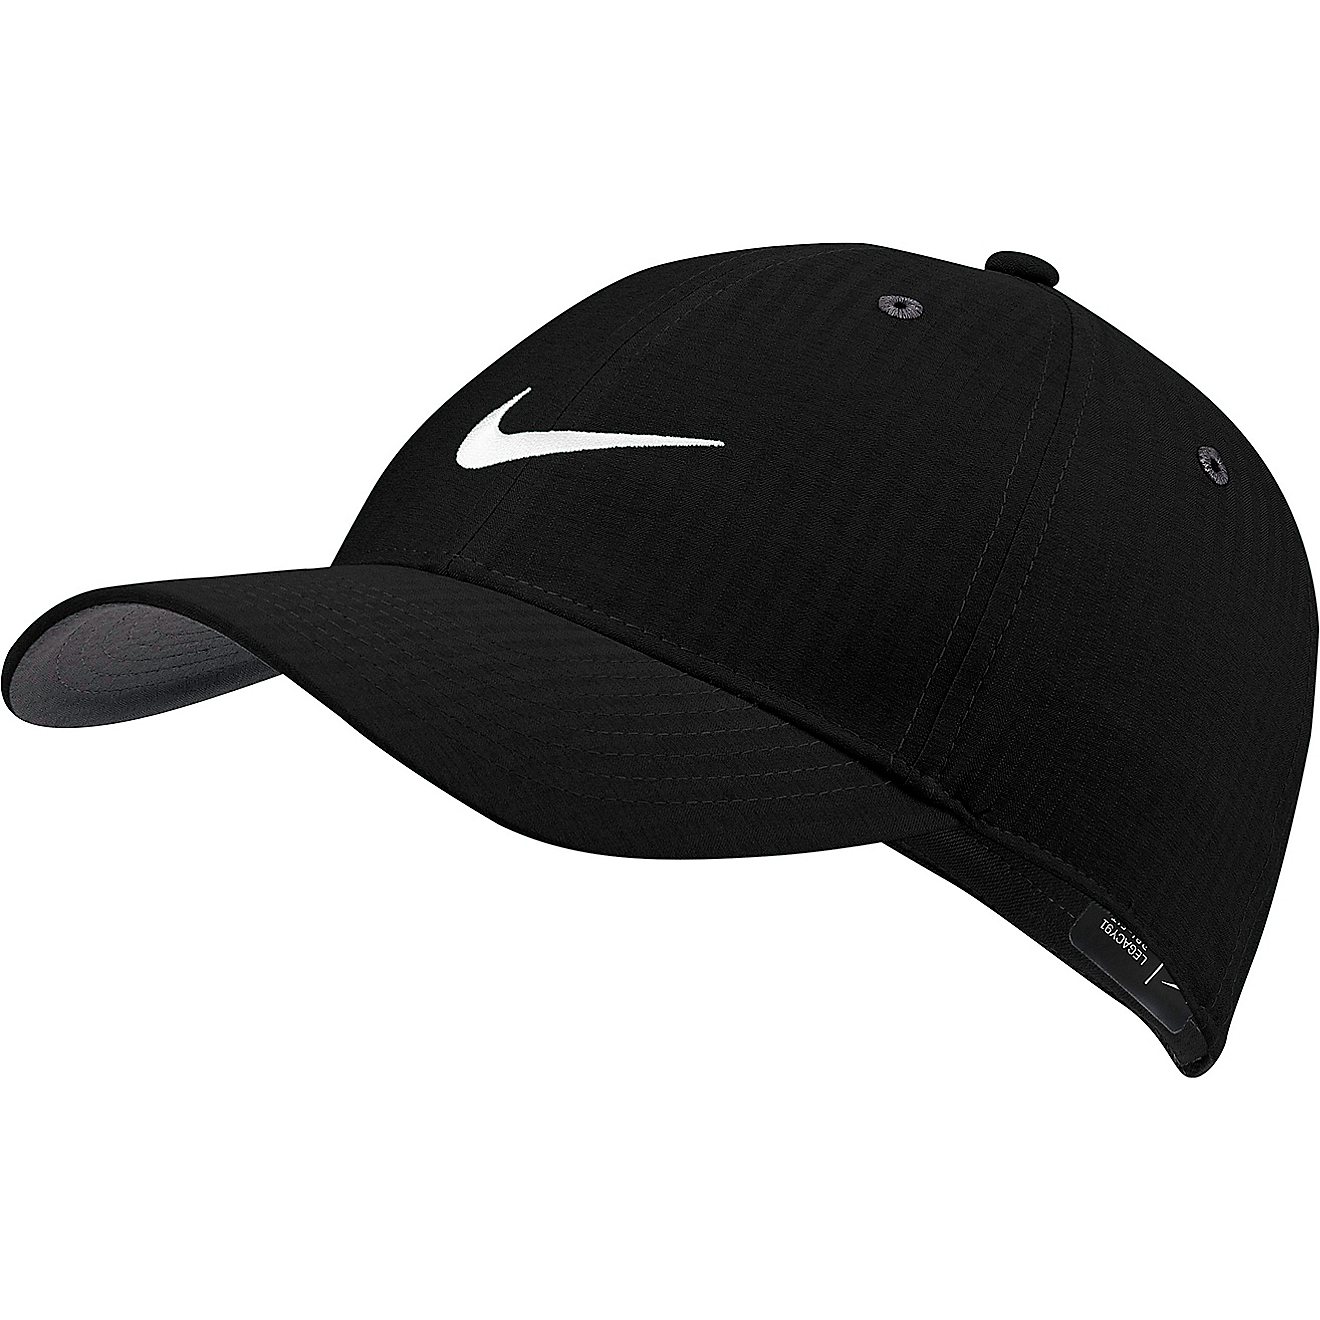 Nike Men's Legacy91 Golf Hat                                                                                                     - view number 1